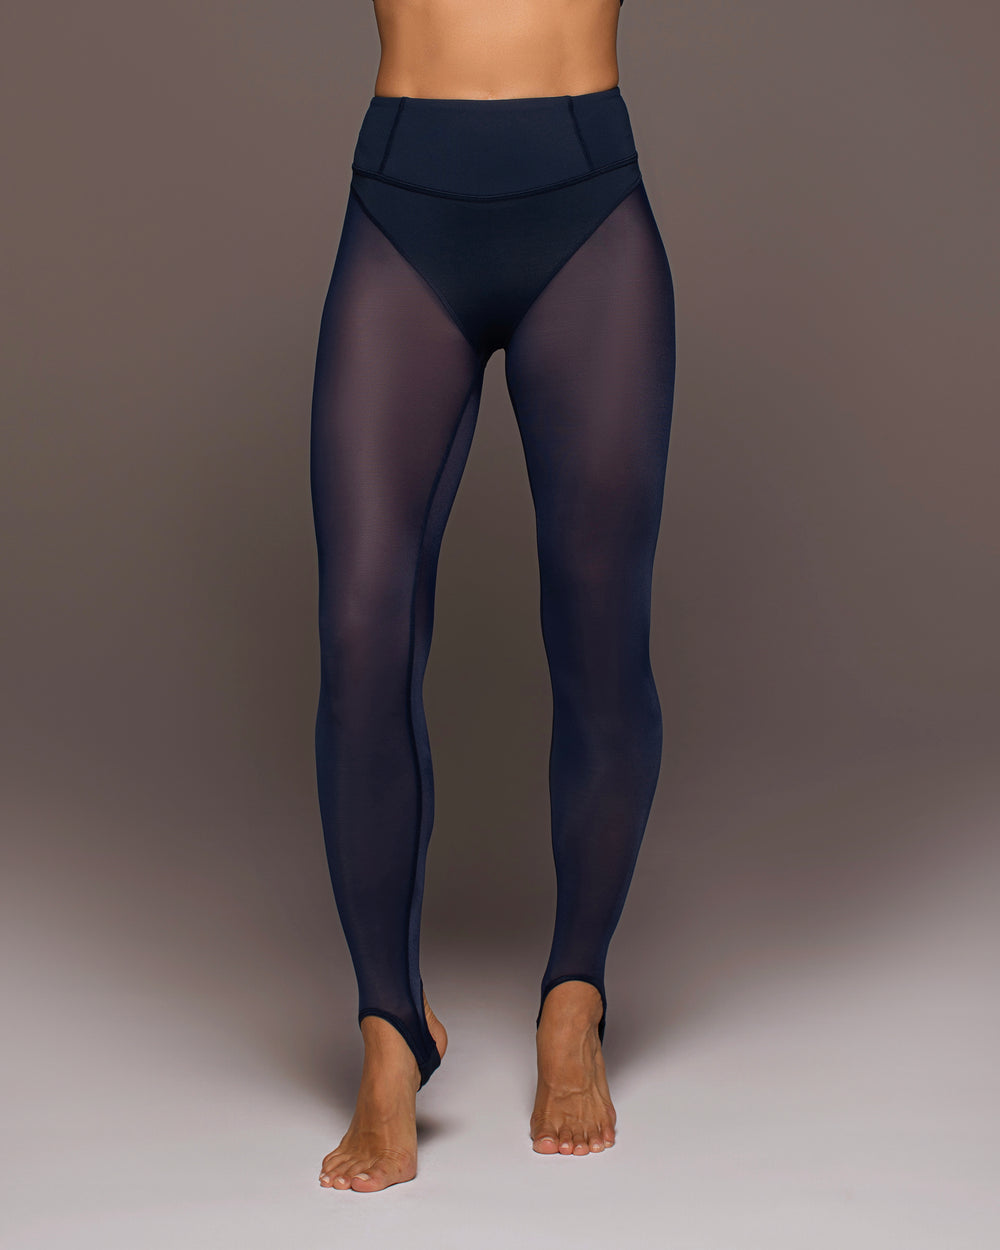 Navy High Waisted Leggings 24” & Reviews - Navy - Sustainable Yoga Bottoms